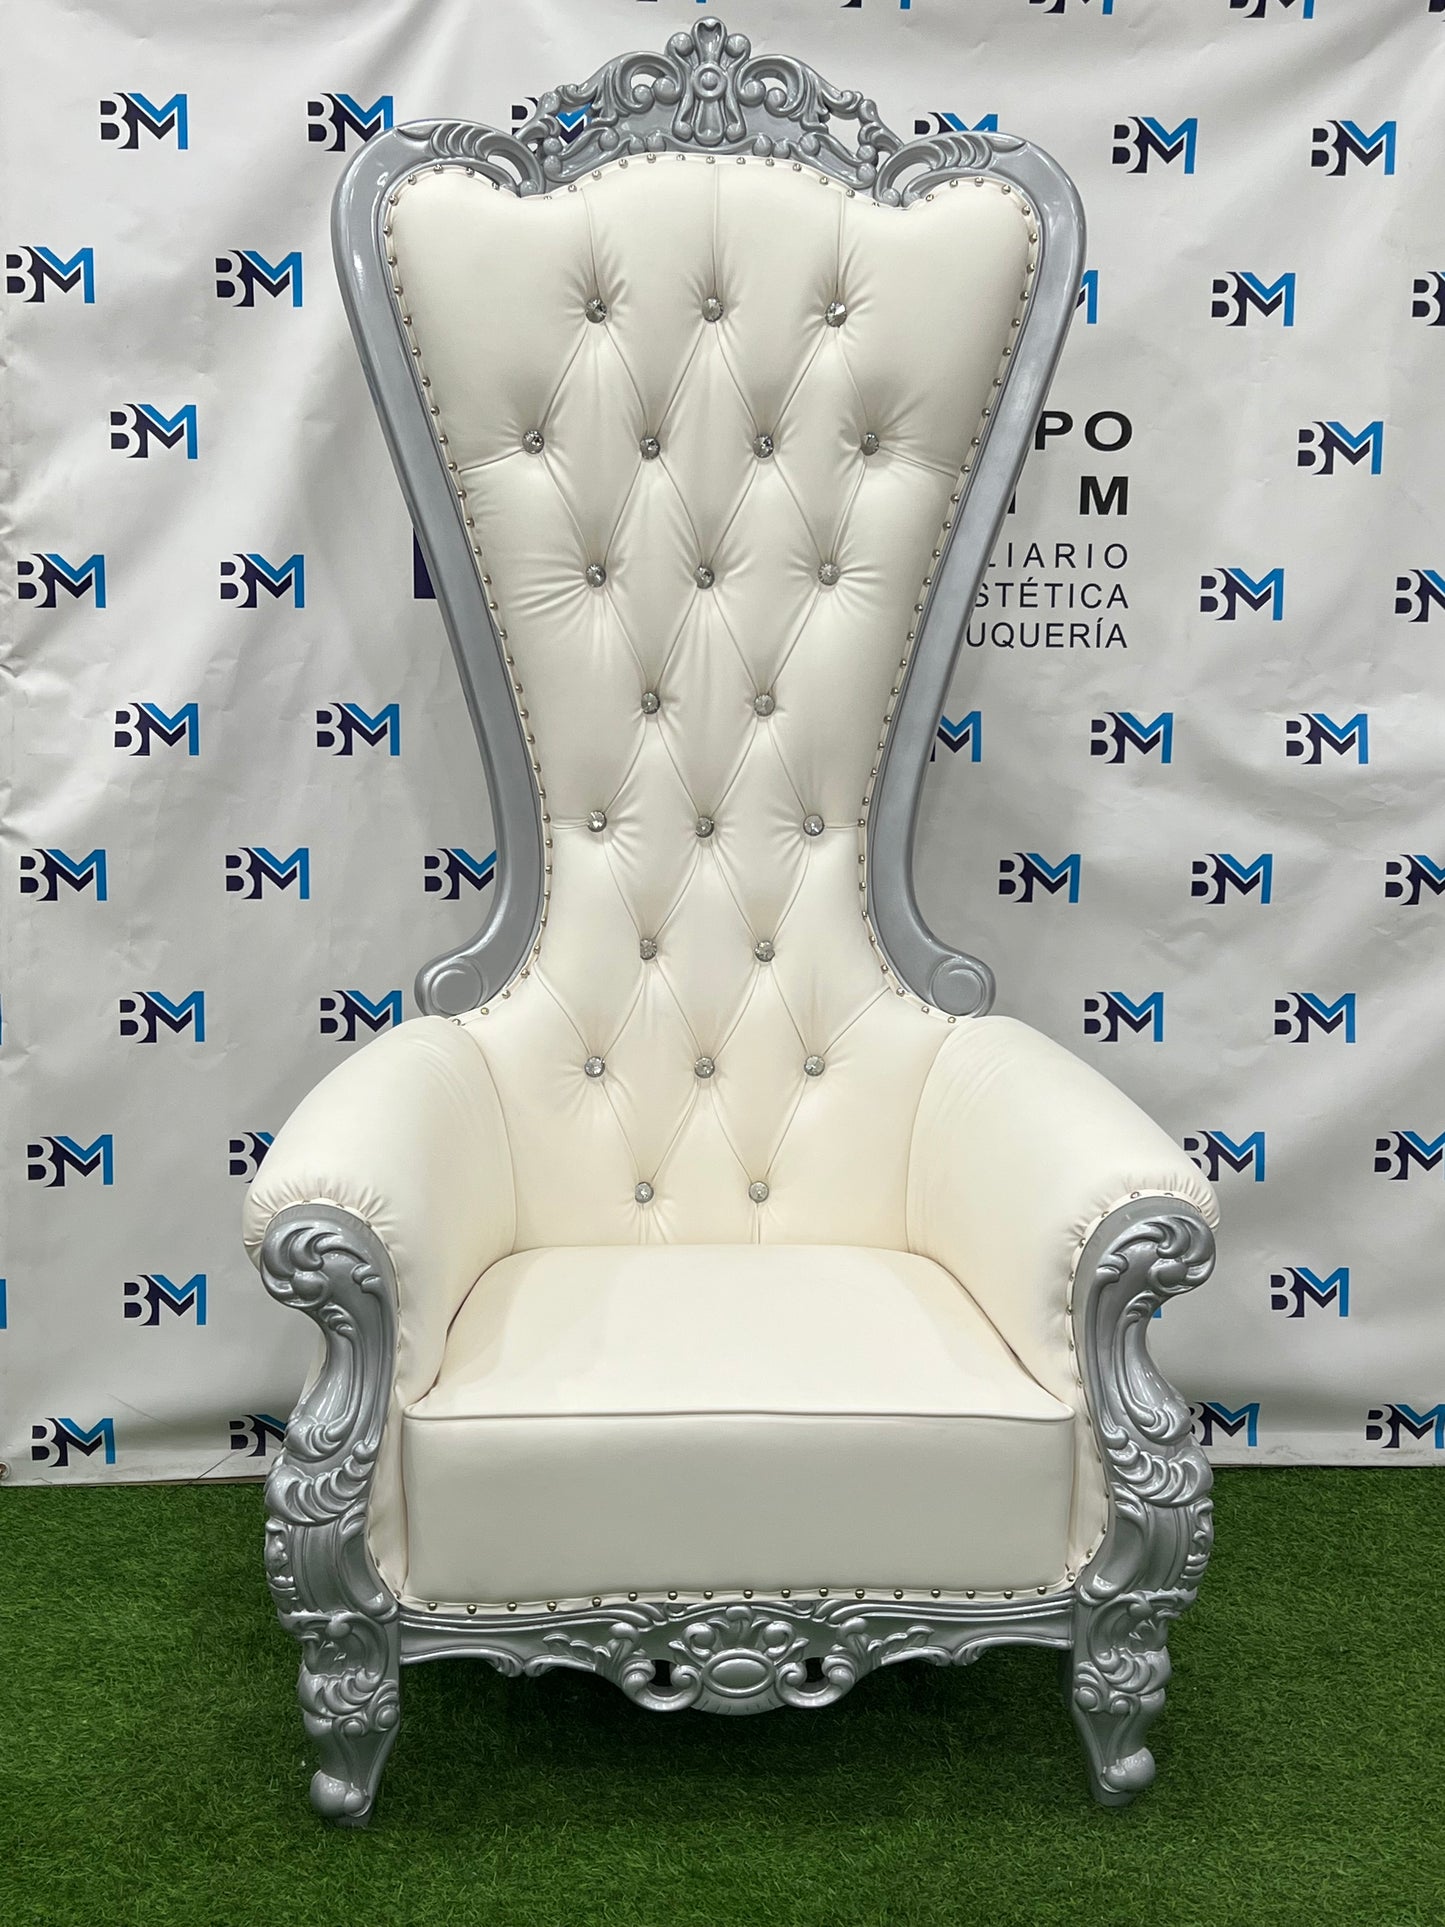 White princess-style pedicure chair with silver